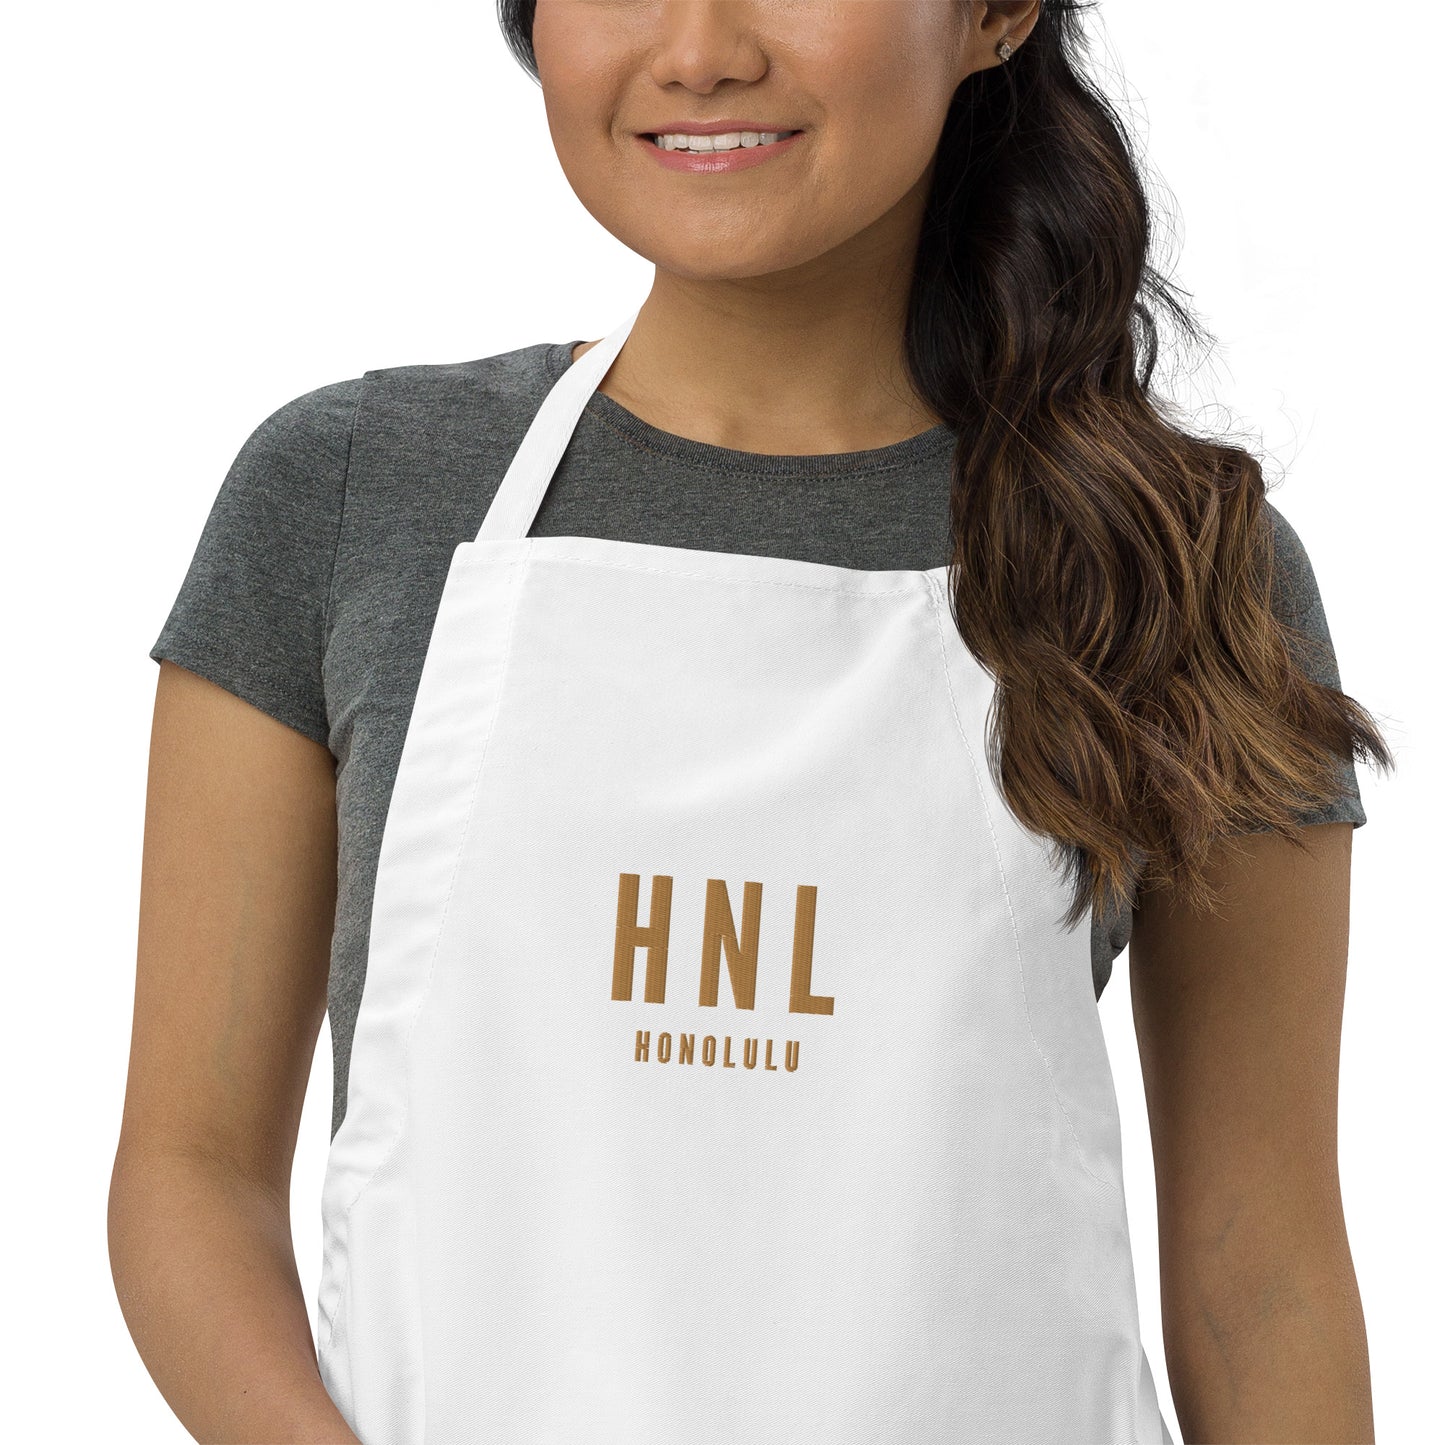 City Embroidered Apron - Old Gold • HNL Honolulu • YHM Designs - Image 08